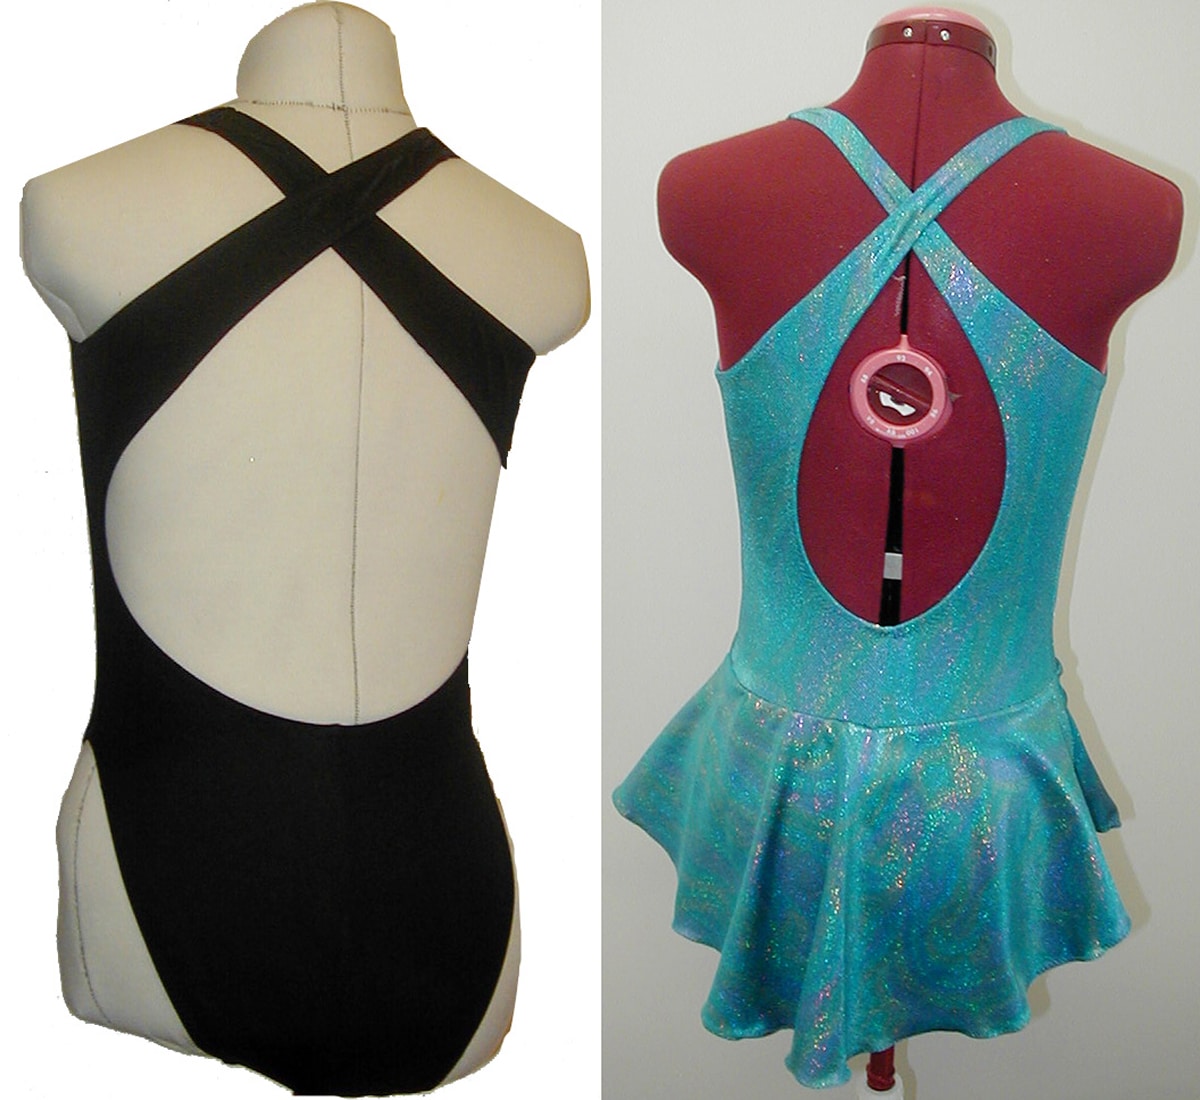 Back views of a black swimsuit and a blue skating dress, both with a crossover back.